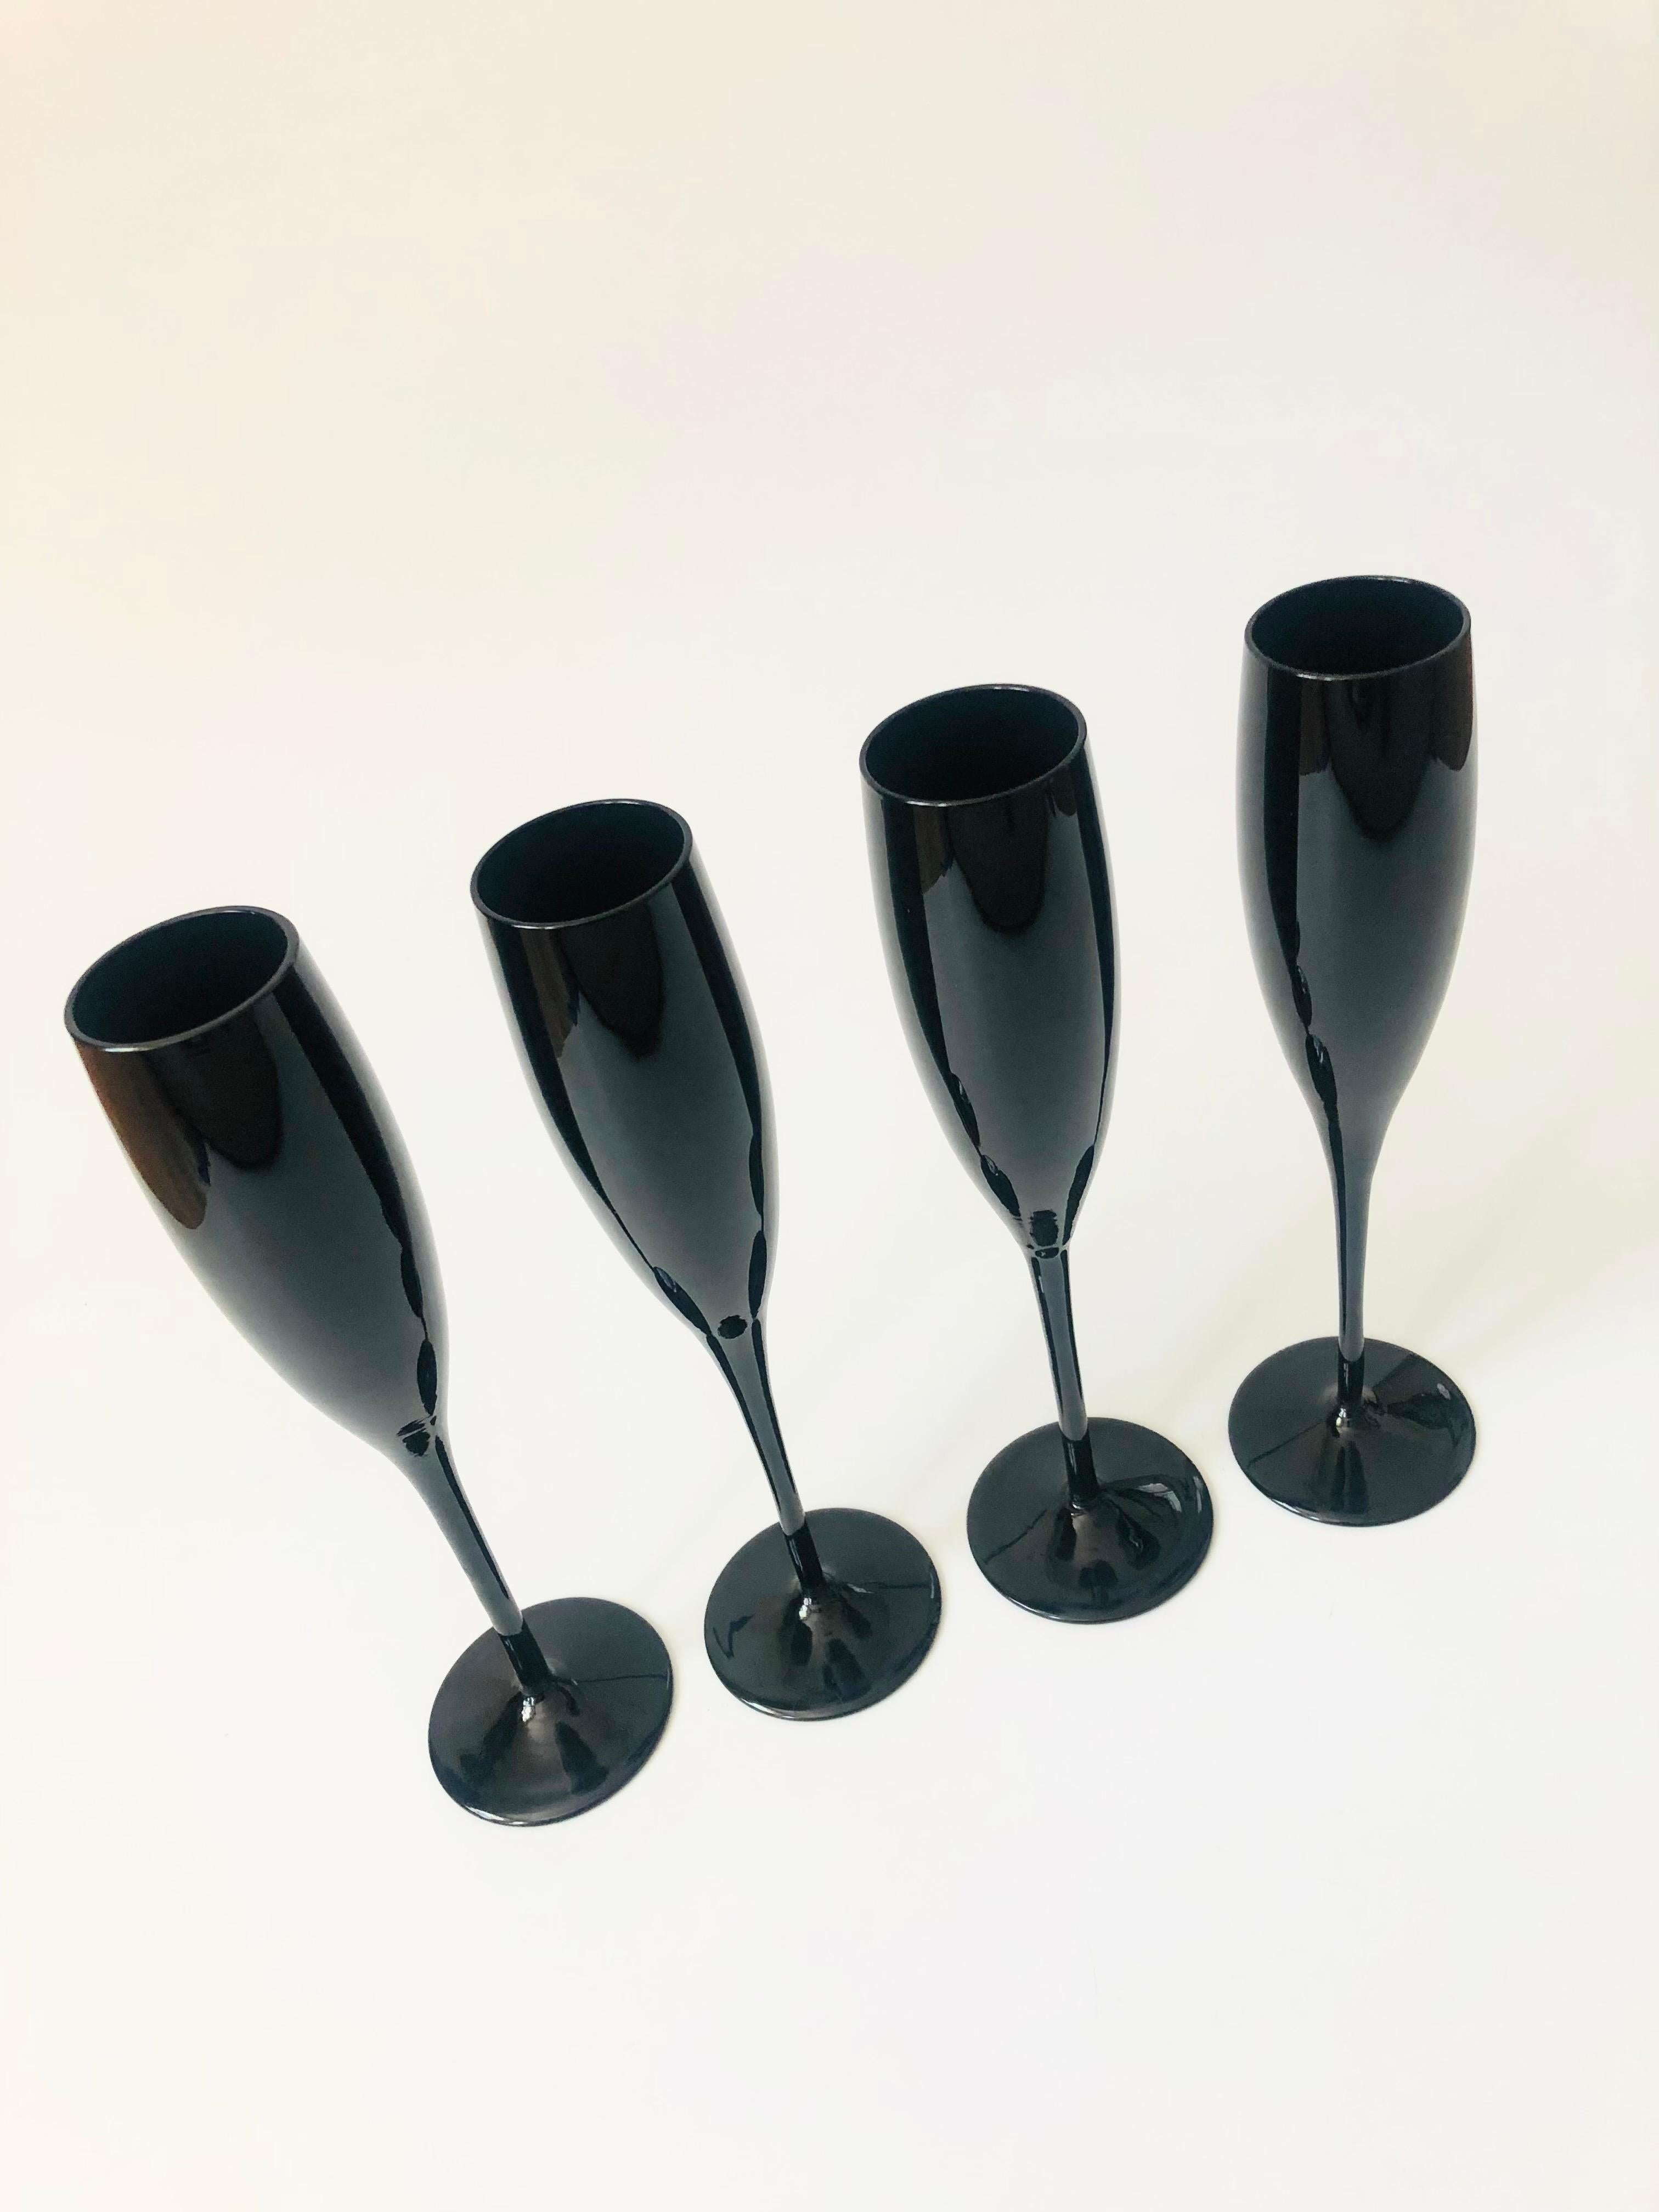 A set of 4 beautiful mid century black champagne flutes. Each in an elegant shape with a tapered stem.
  